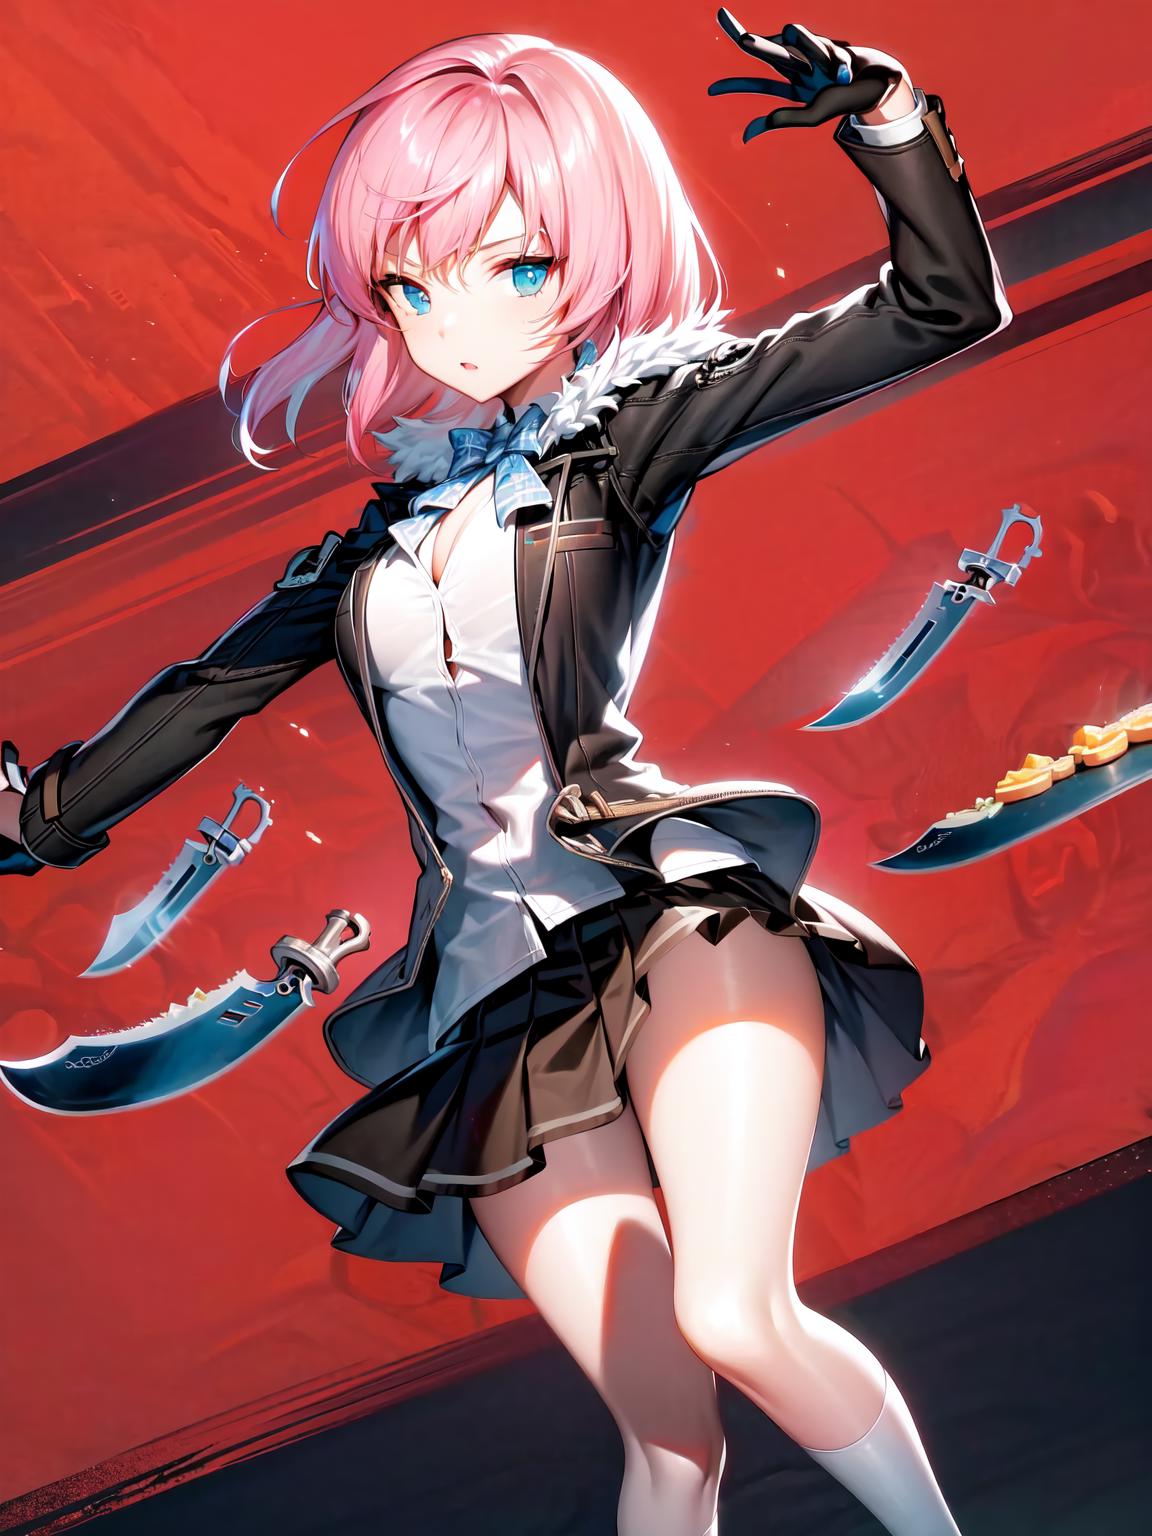 Danbooru, Closers, action Game, Gloves, Lance, roleplaying Game, Holding,  fashion Illustration, cold Weapon, wikia | Anyrgb